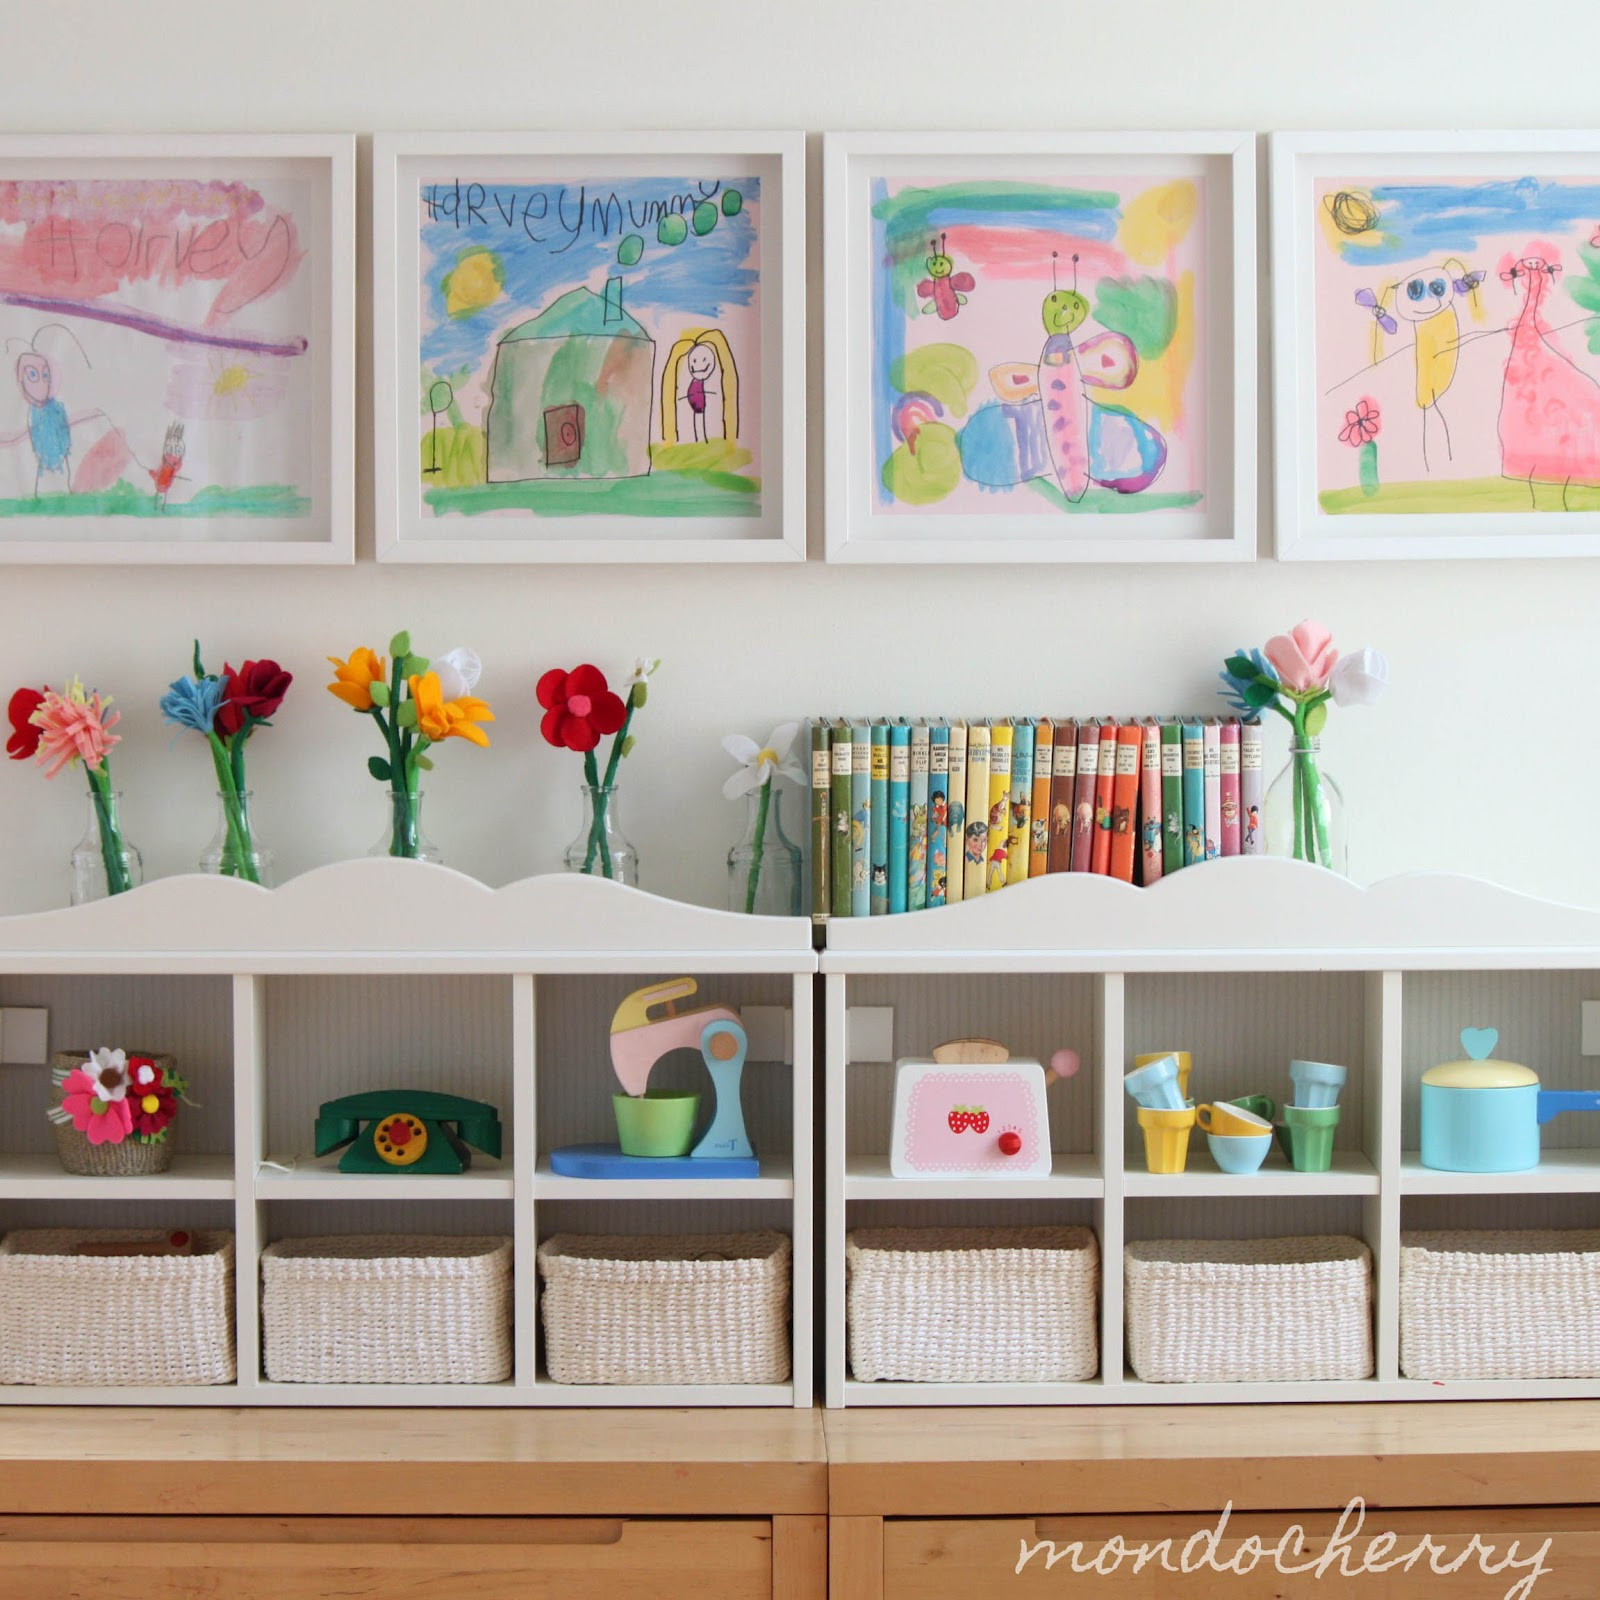 Wall Art Kids Rooms
 What to Do With Children s Artwork